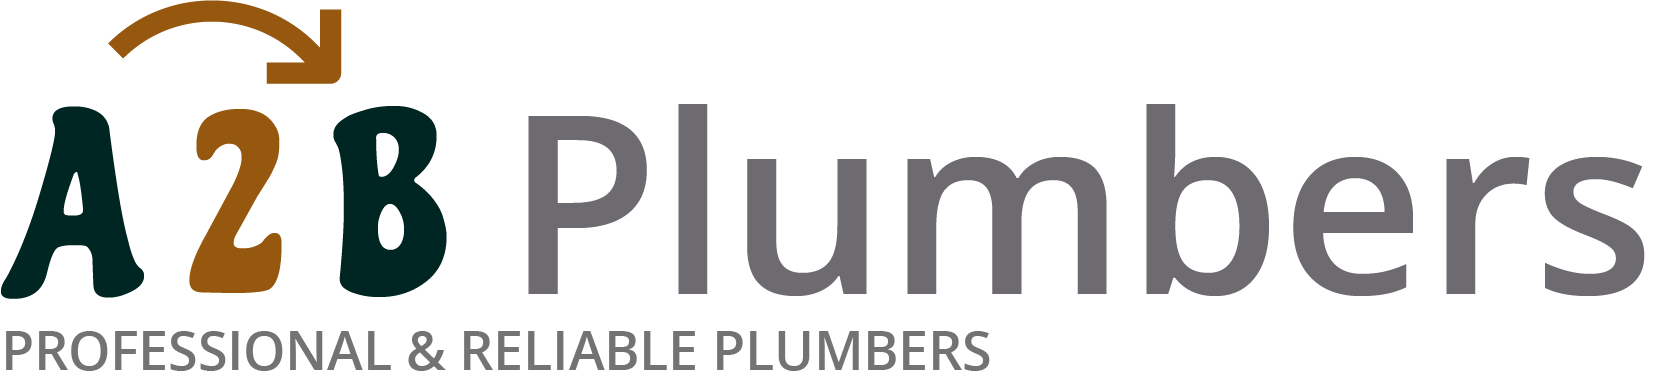 If you need a boiler installed, a radiator repaired or a leaking tap fixed, call us now - we provide services for properties in Camborne and the local area.